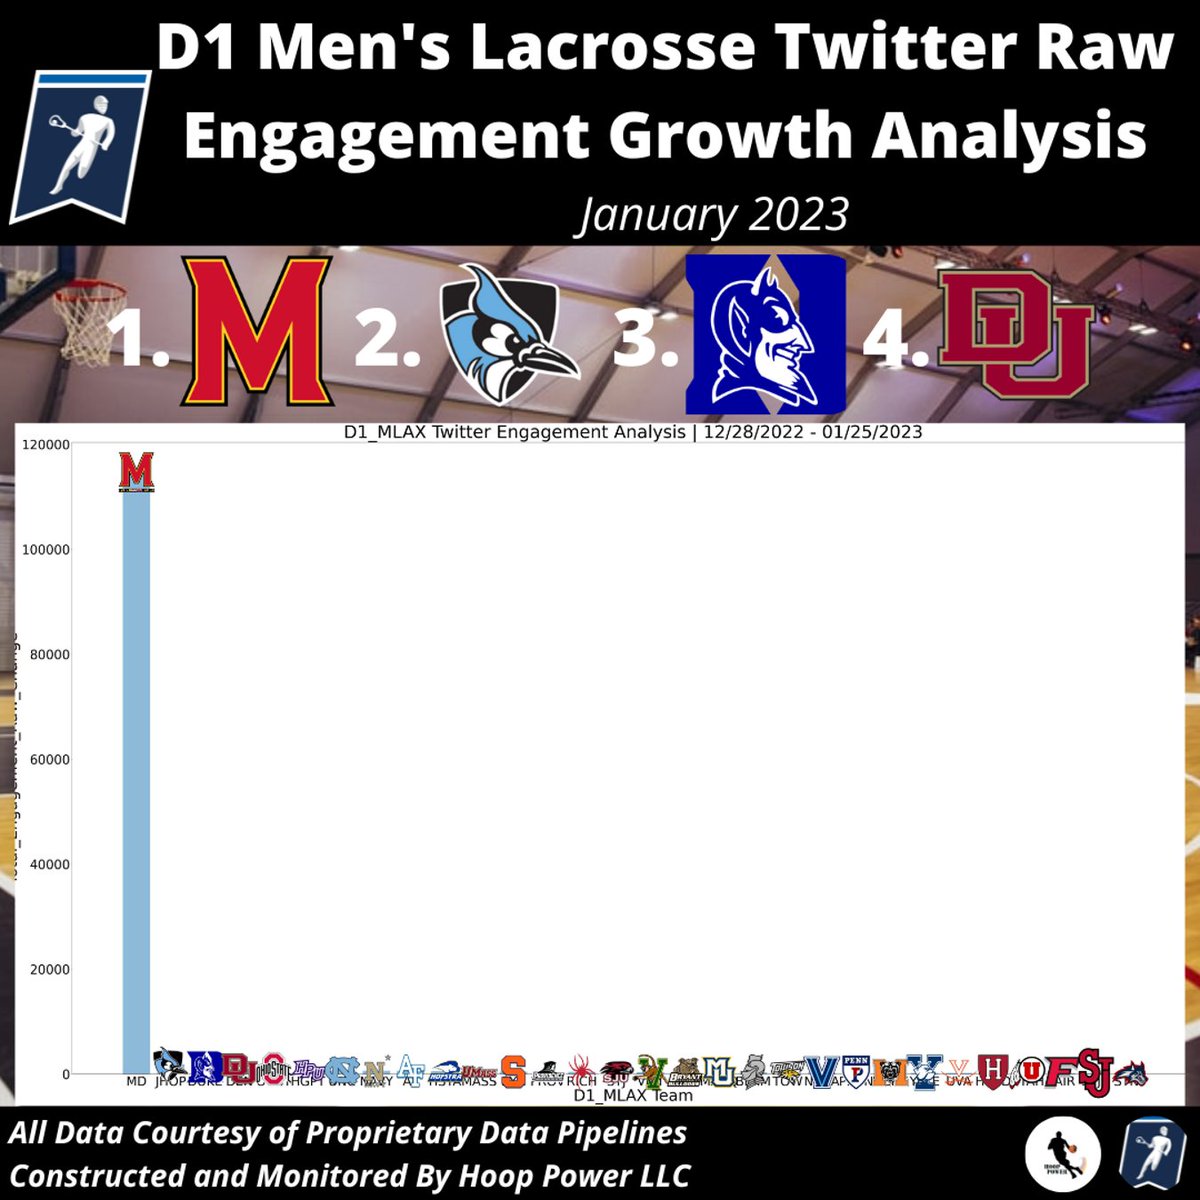 Which Men's #D1lacrosse Programs Saw The Largest Total Growth In Engagement On #Twitter In January 2023?

1 - @UDMLAX
2 - @jhumenslacrosse
3 - @DukeMLAX
4 - @DU_MLAX

#StatsTwitter #SocialAnalytics #DetroitsCollegeTeam #GoHop #GoDuke #GoPios